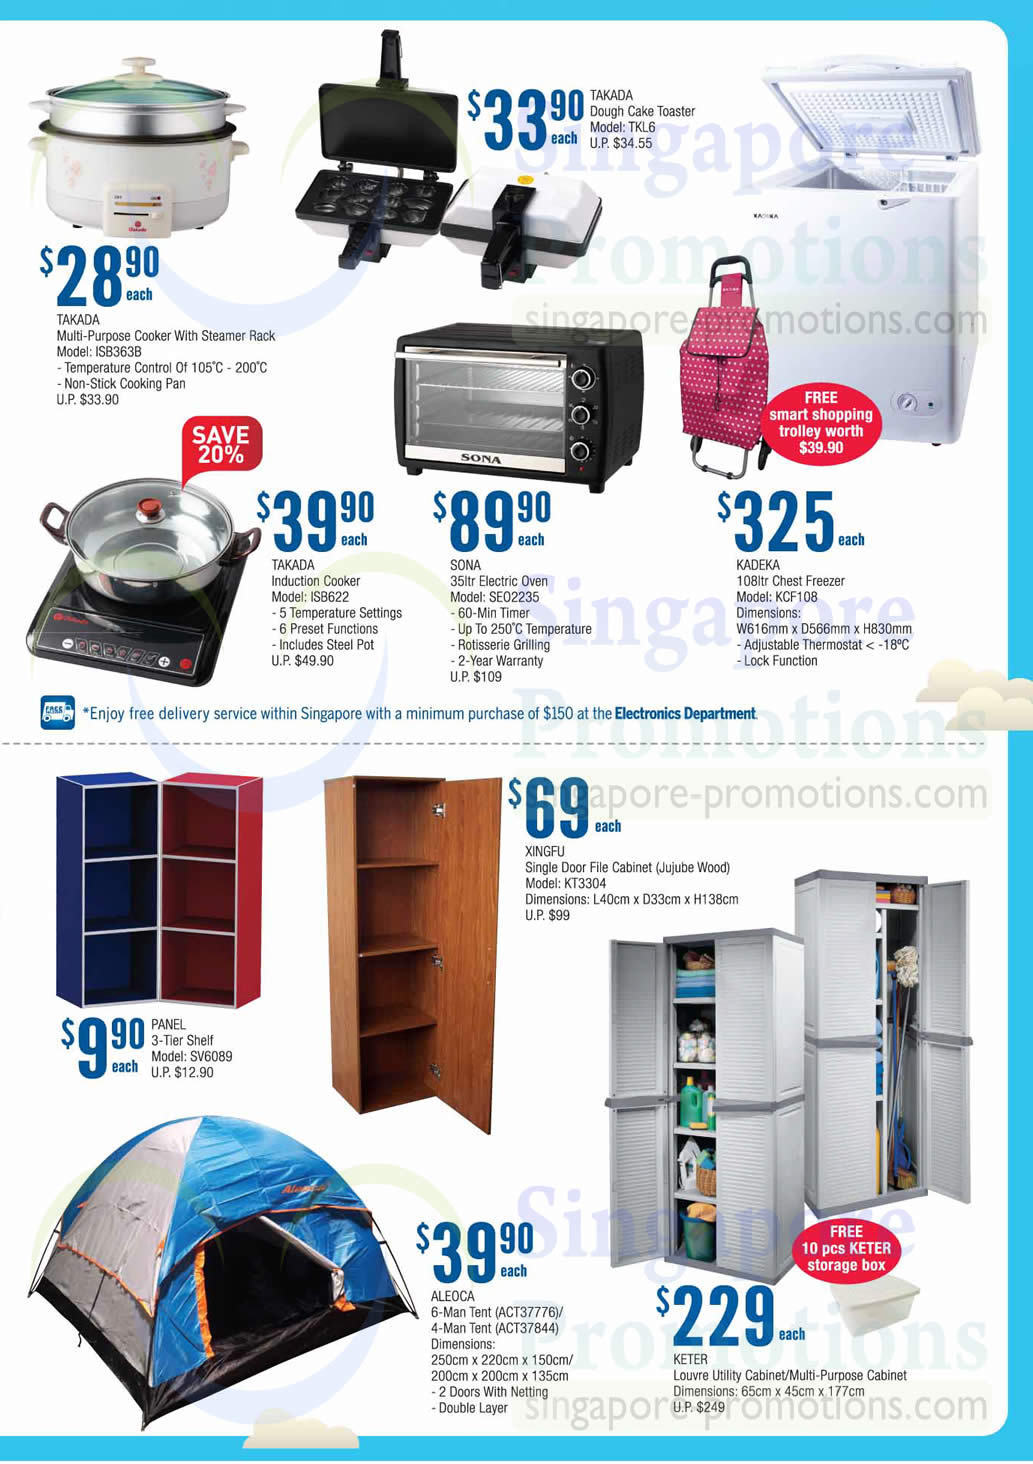 Featured image for NTUC Fairprice Electronics, Appliances & Personal Care Offers 25 Jul - 7 Aug 2013